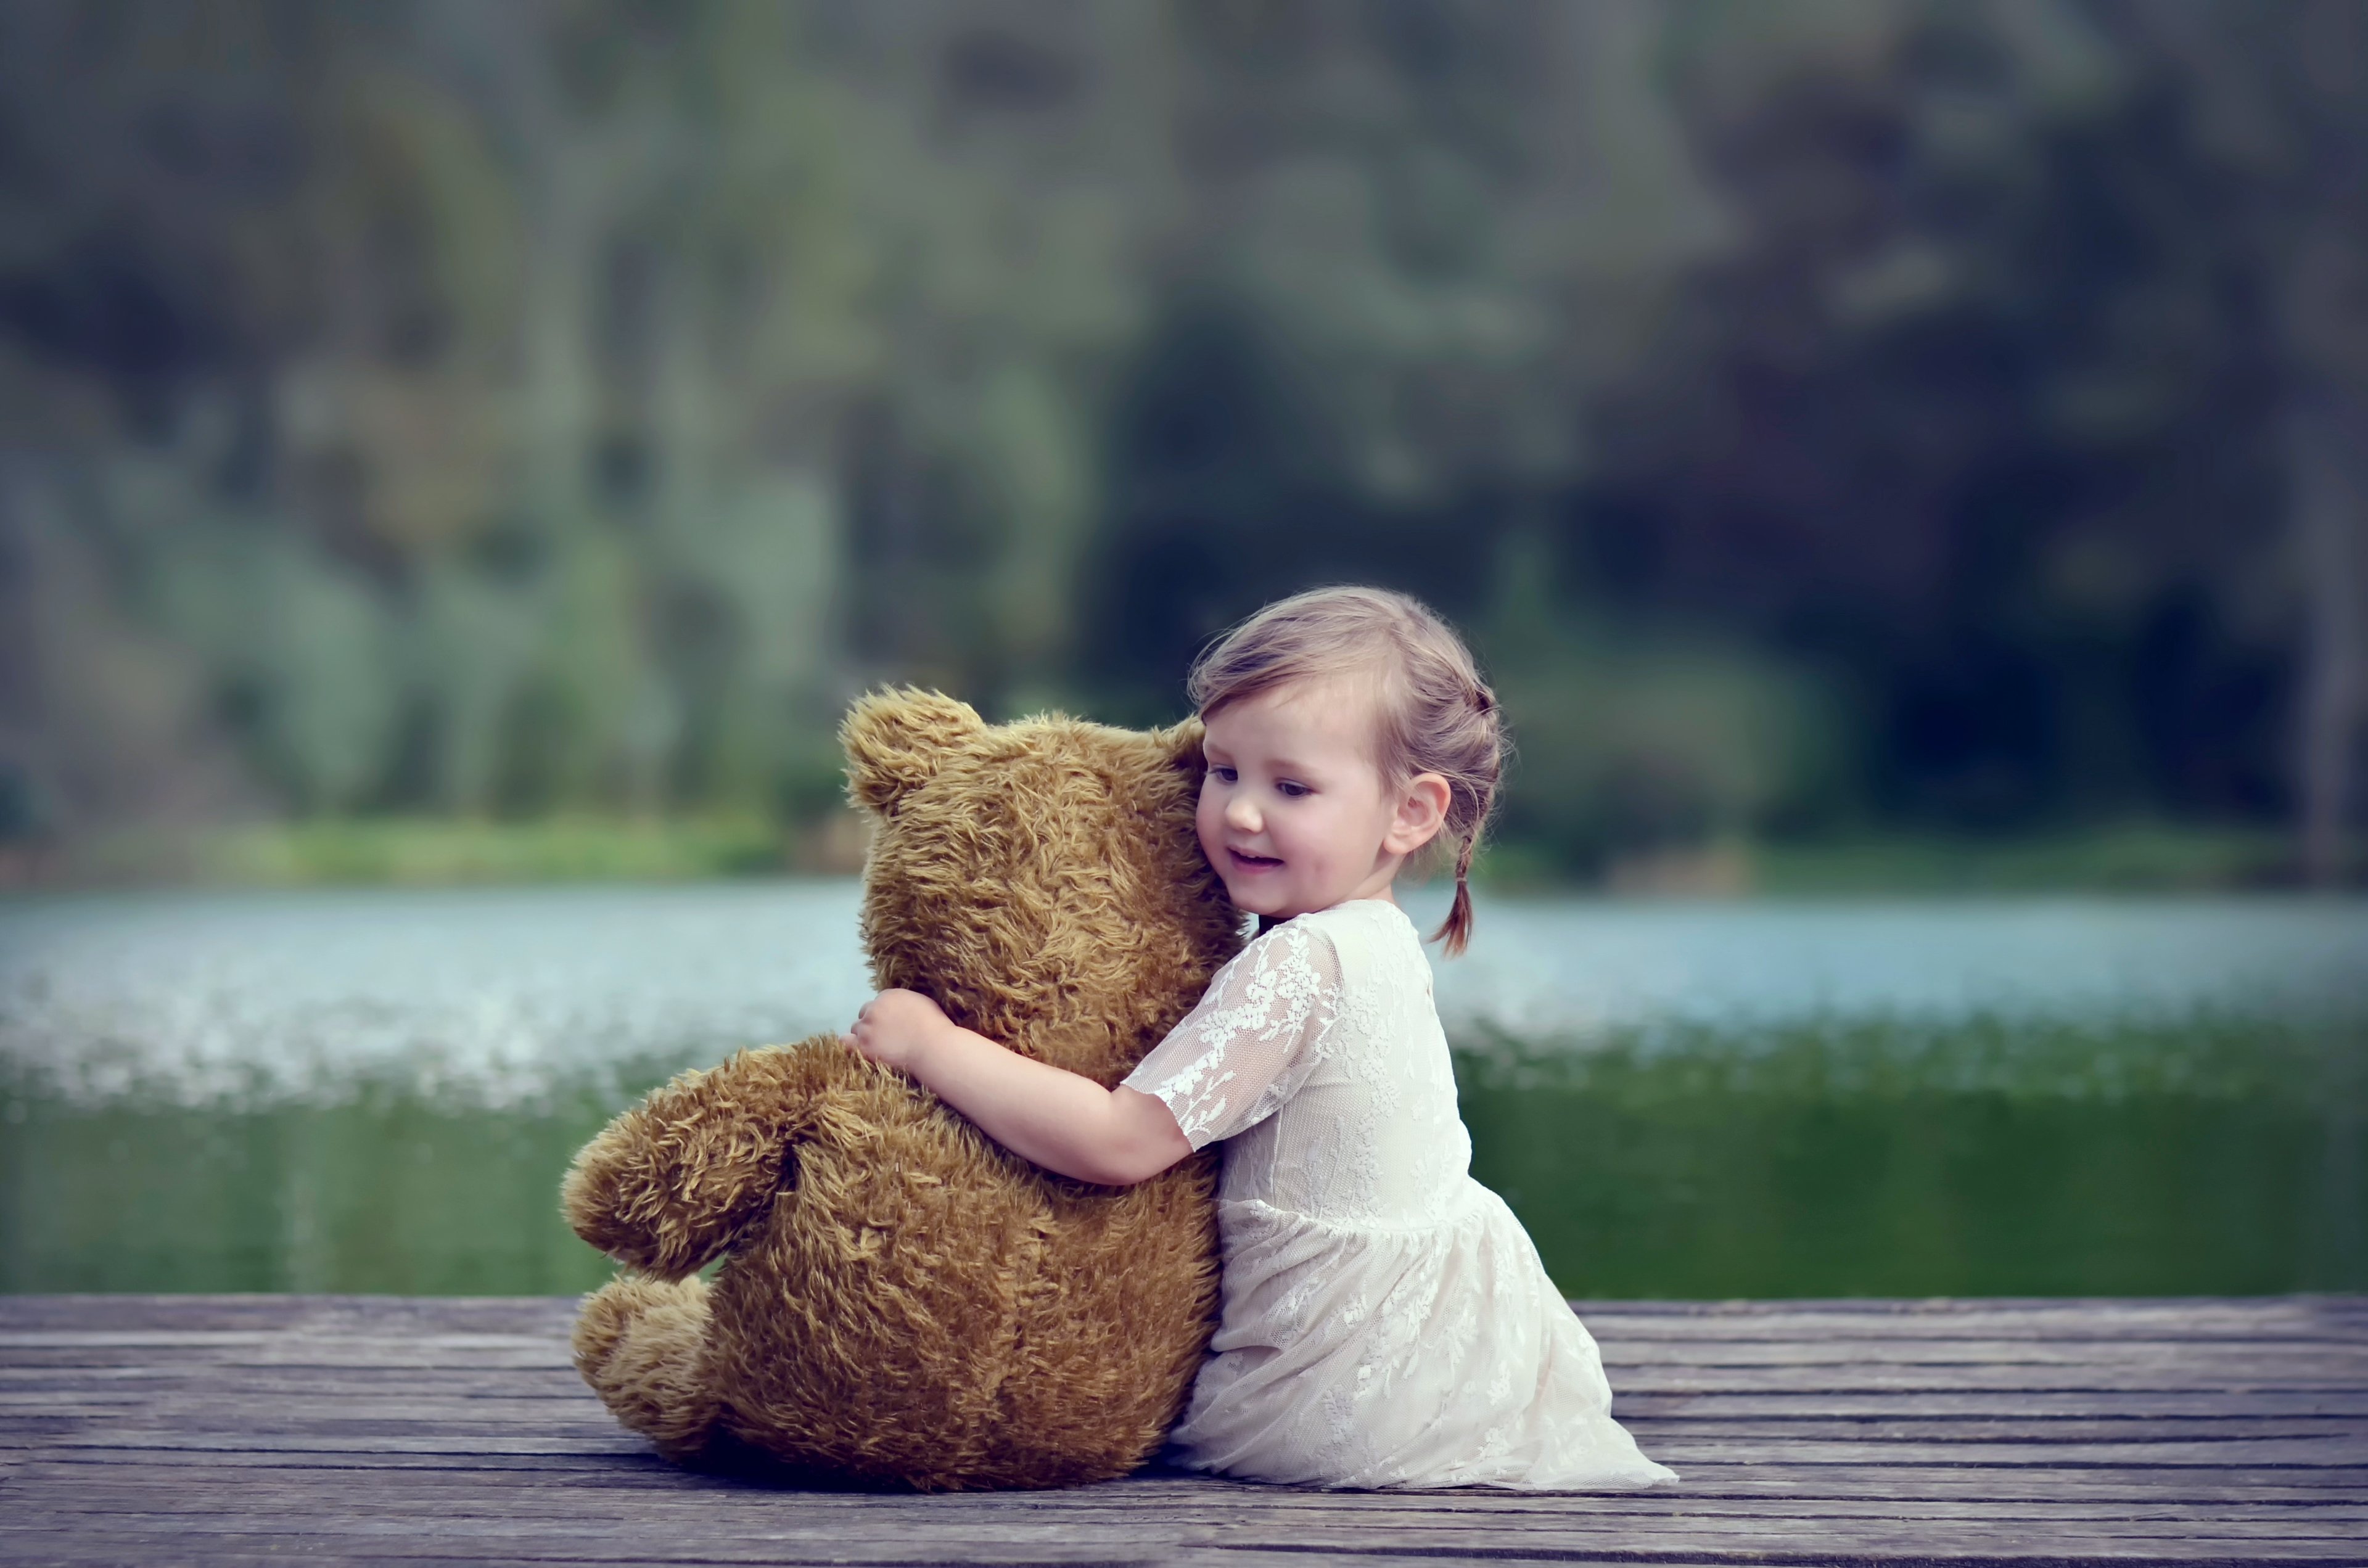 alone, Child, Doll, Forest, Girl, Kids, Littel, Lonely, Nature, Princess, Red, Sad, Way, Teddy, Bear, Friendship, Lake Wallpaper